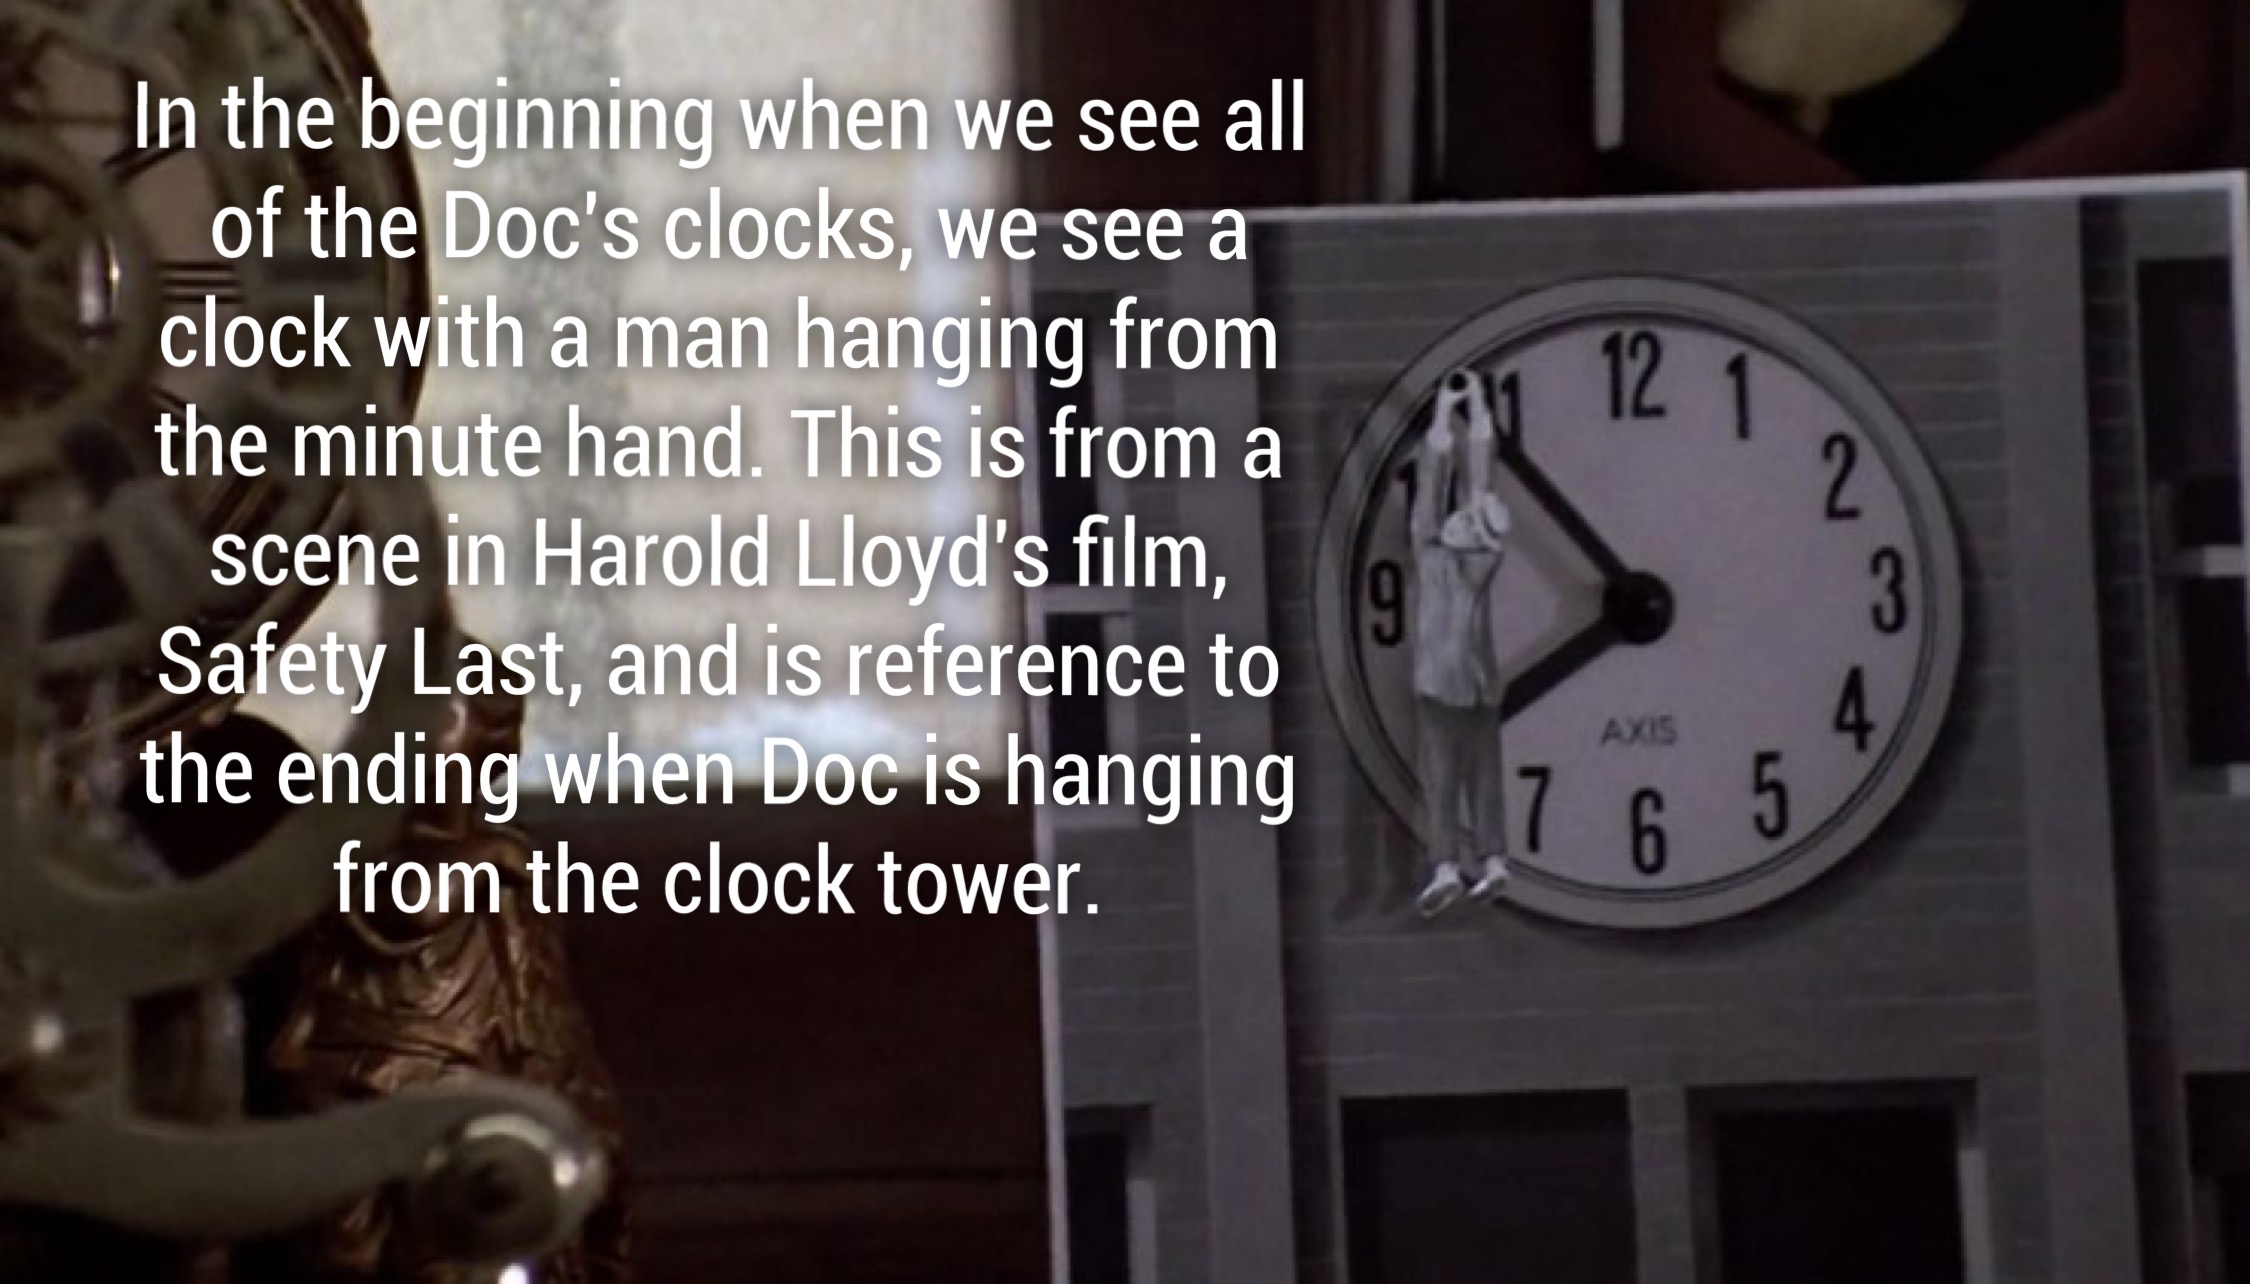 Al 12 In the beginning when we see all of the Doc's clocks, we see a clock with a man hanging from the minute hand. This is from a scene in Harold Lloyd's film, Safety Last, and is reference to the ending when Doc is hanging from the clock tower. Axis 47 